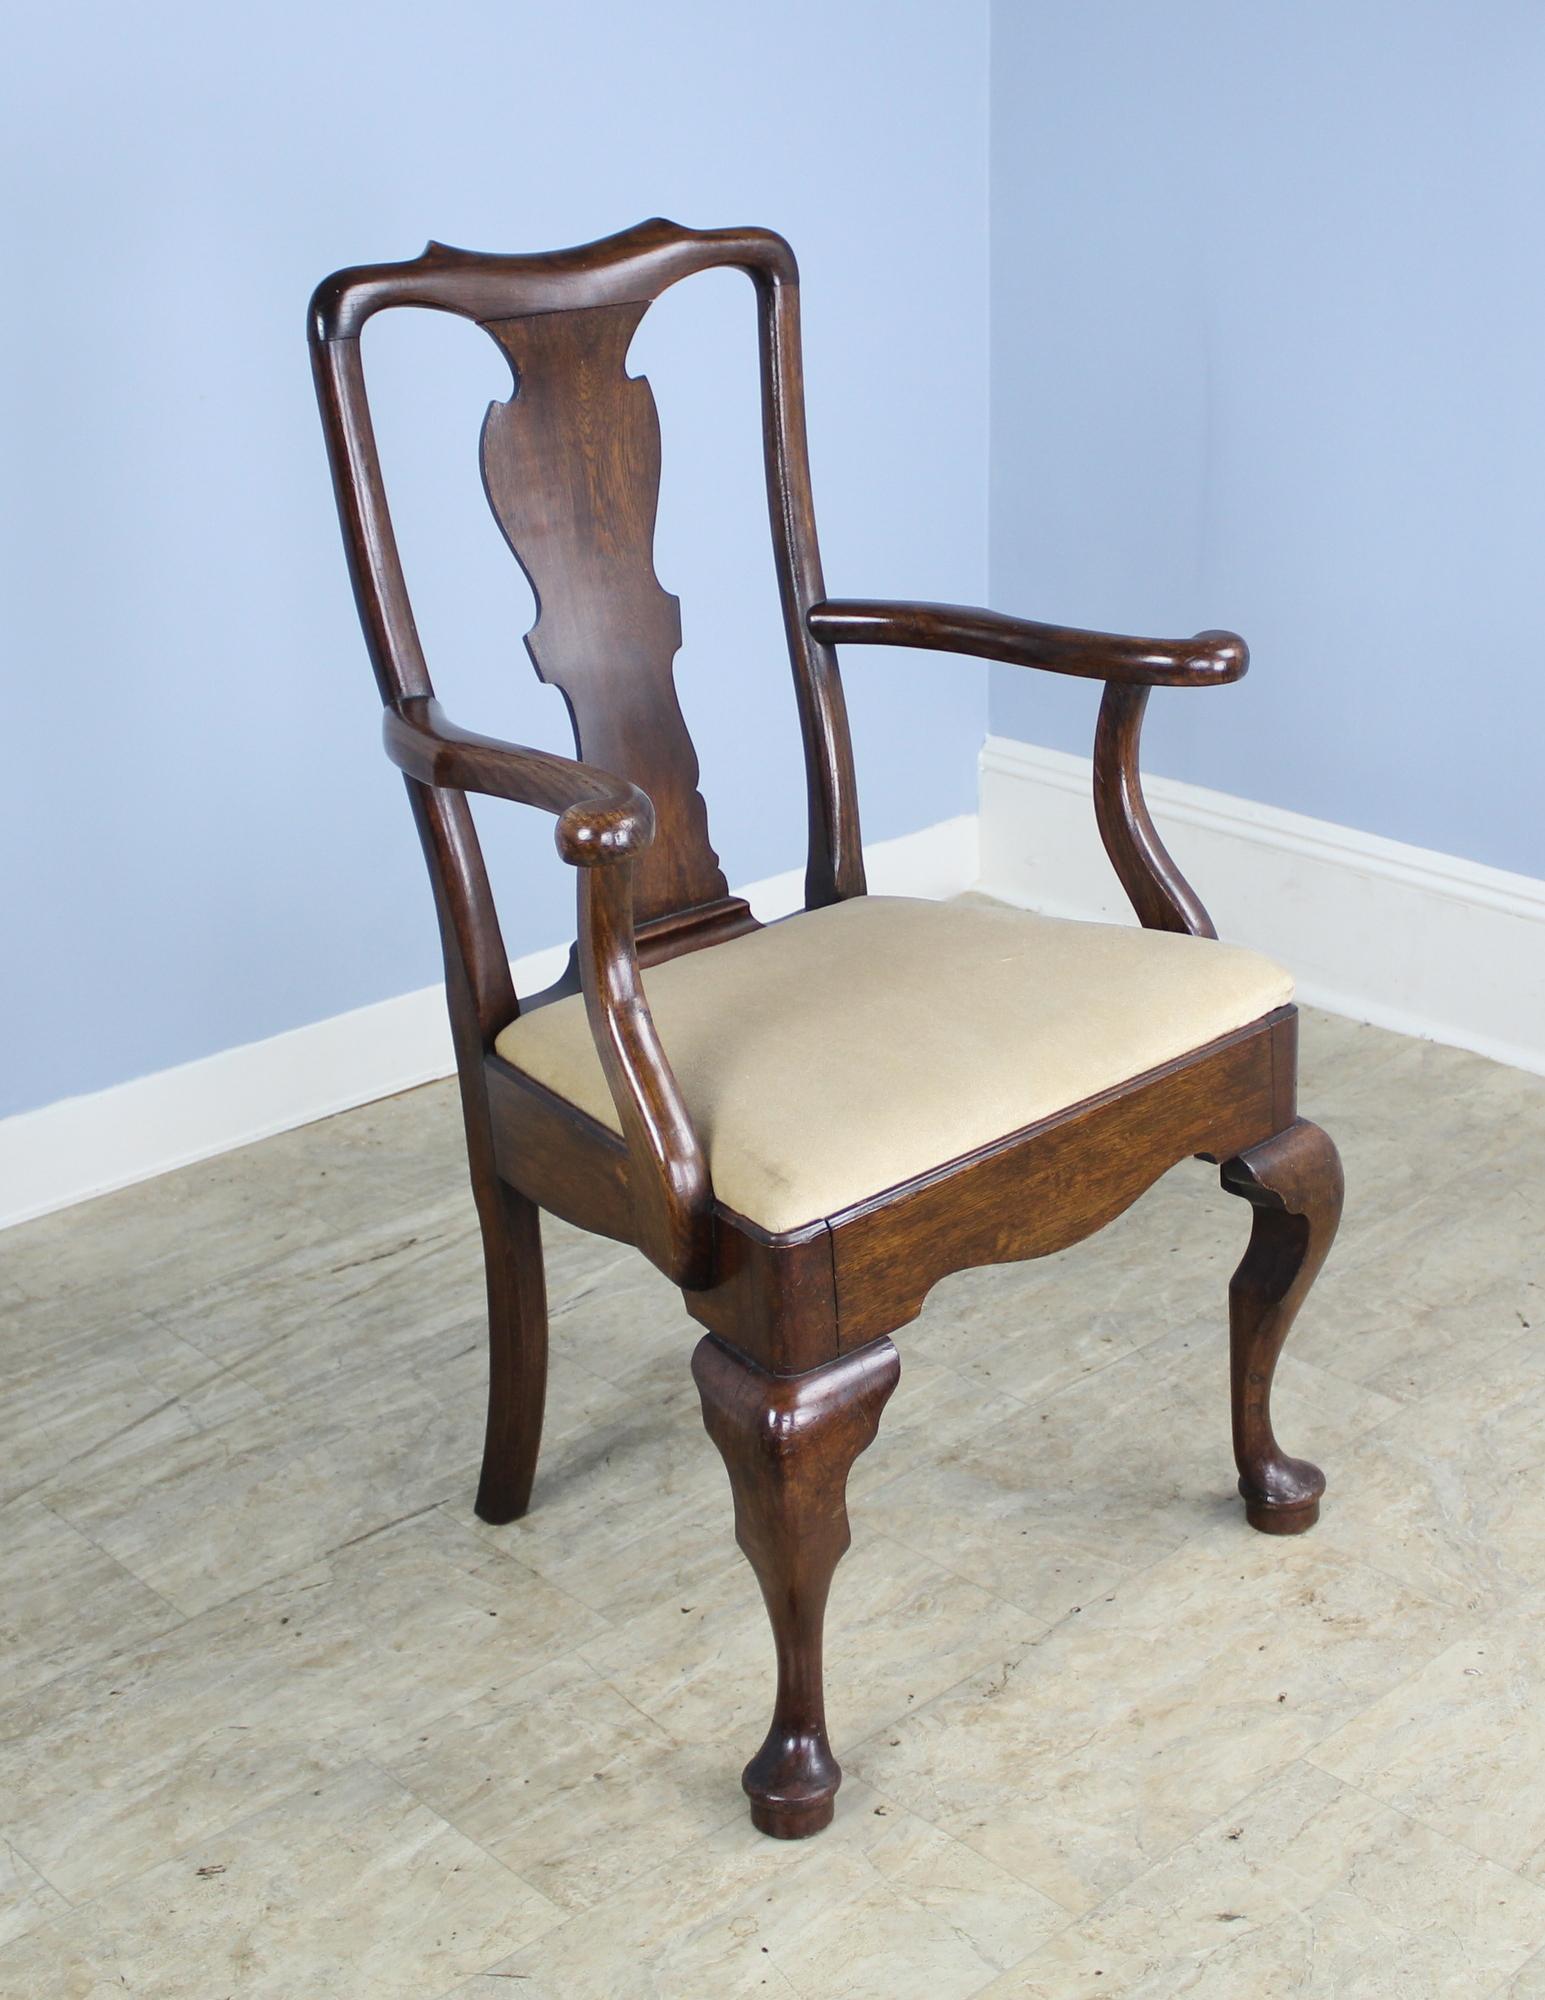 A set of four side and two armchairs made of solid oak in the George III style. Wonderful rich brown color and in very good sturdy condition. Measurement below is for the arm chairs. The side chairs measure 22